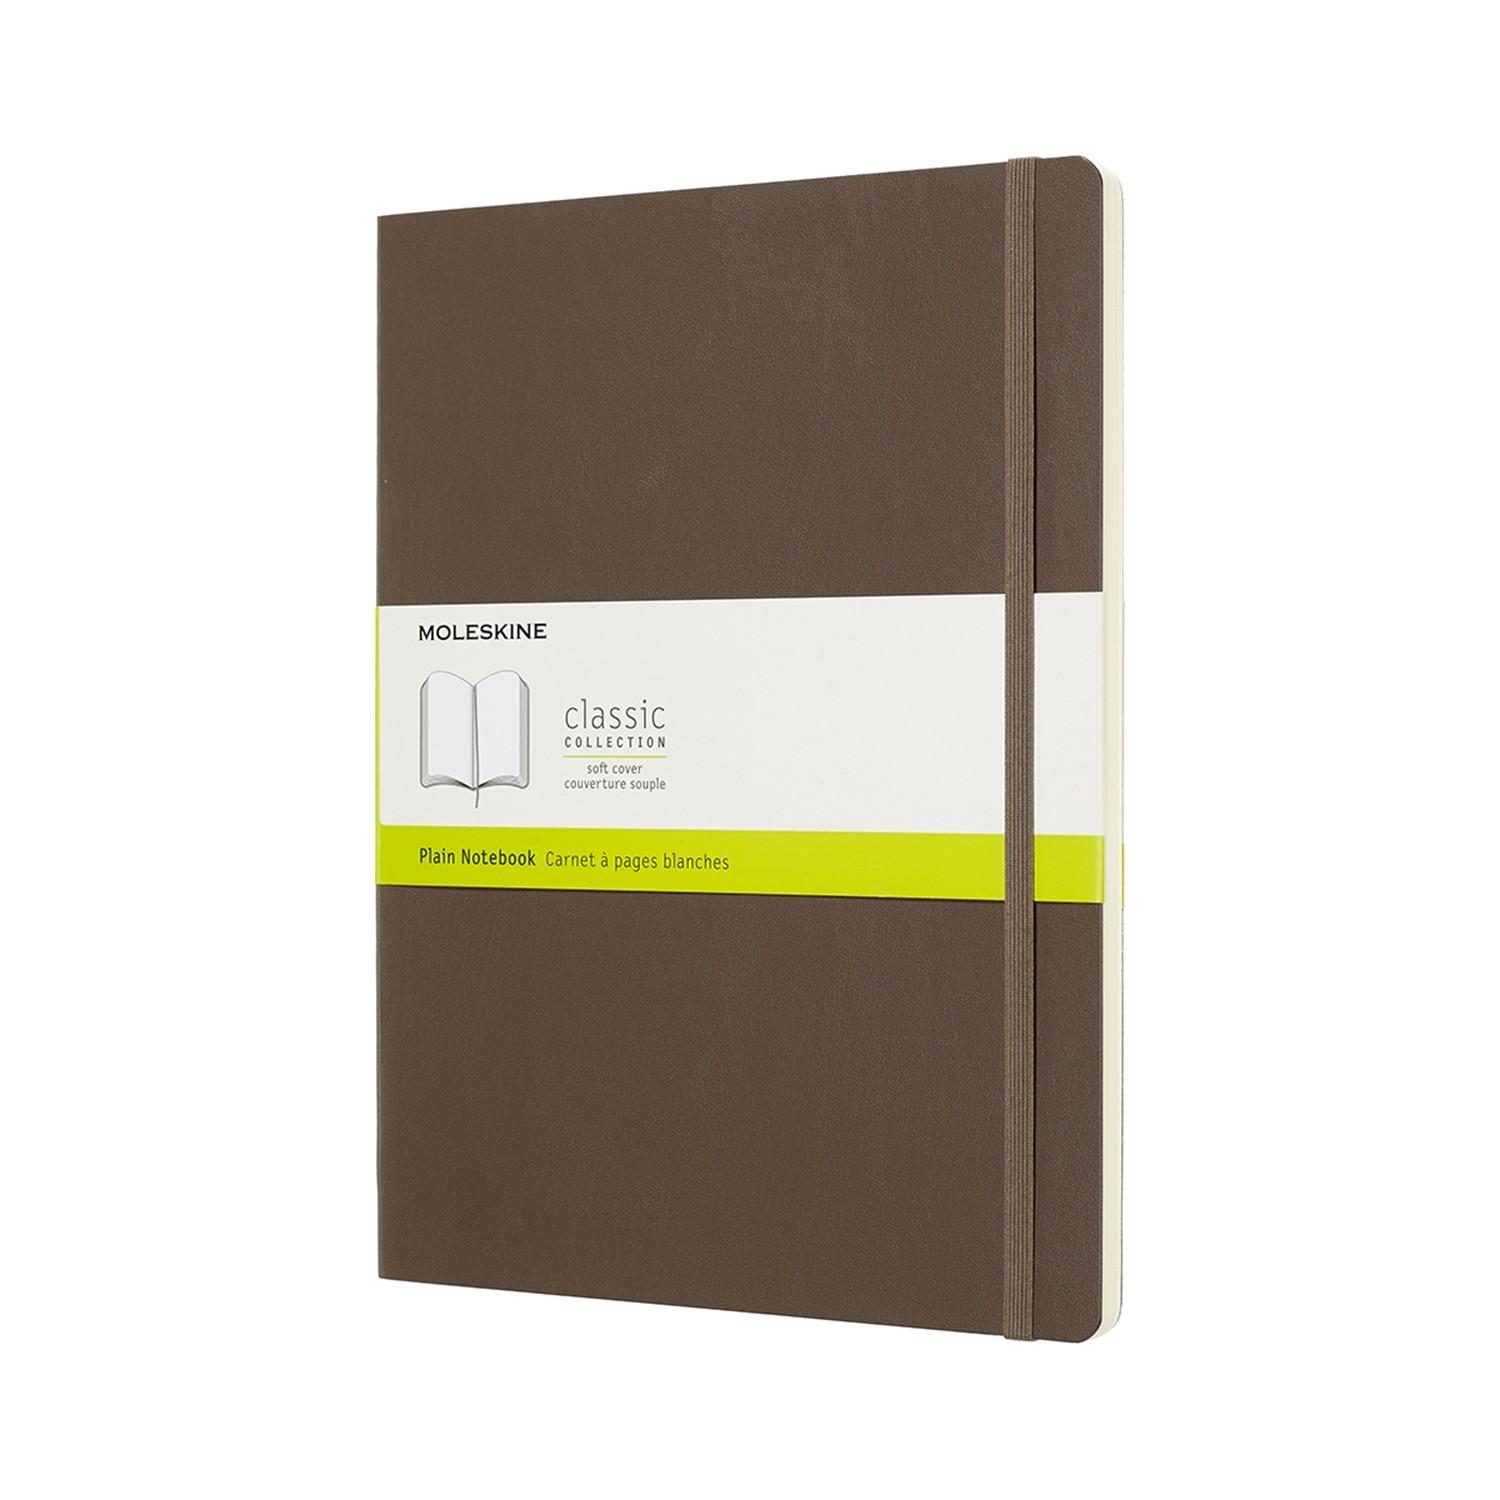 Moleskine Notebook Xlarge Plain Earth Brown Soft COVER